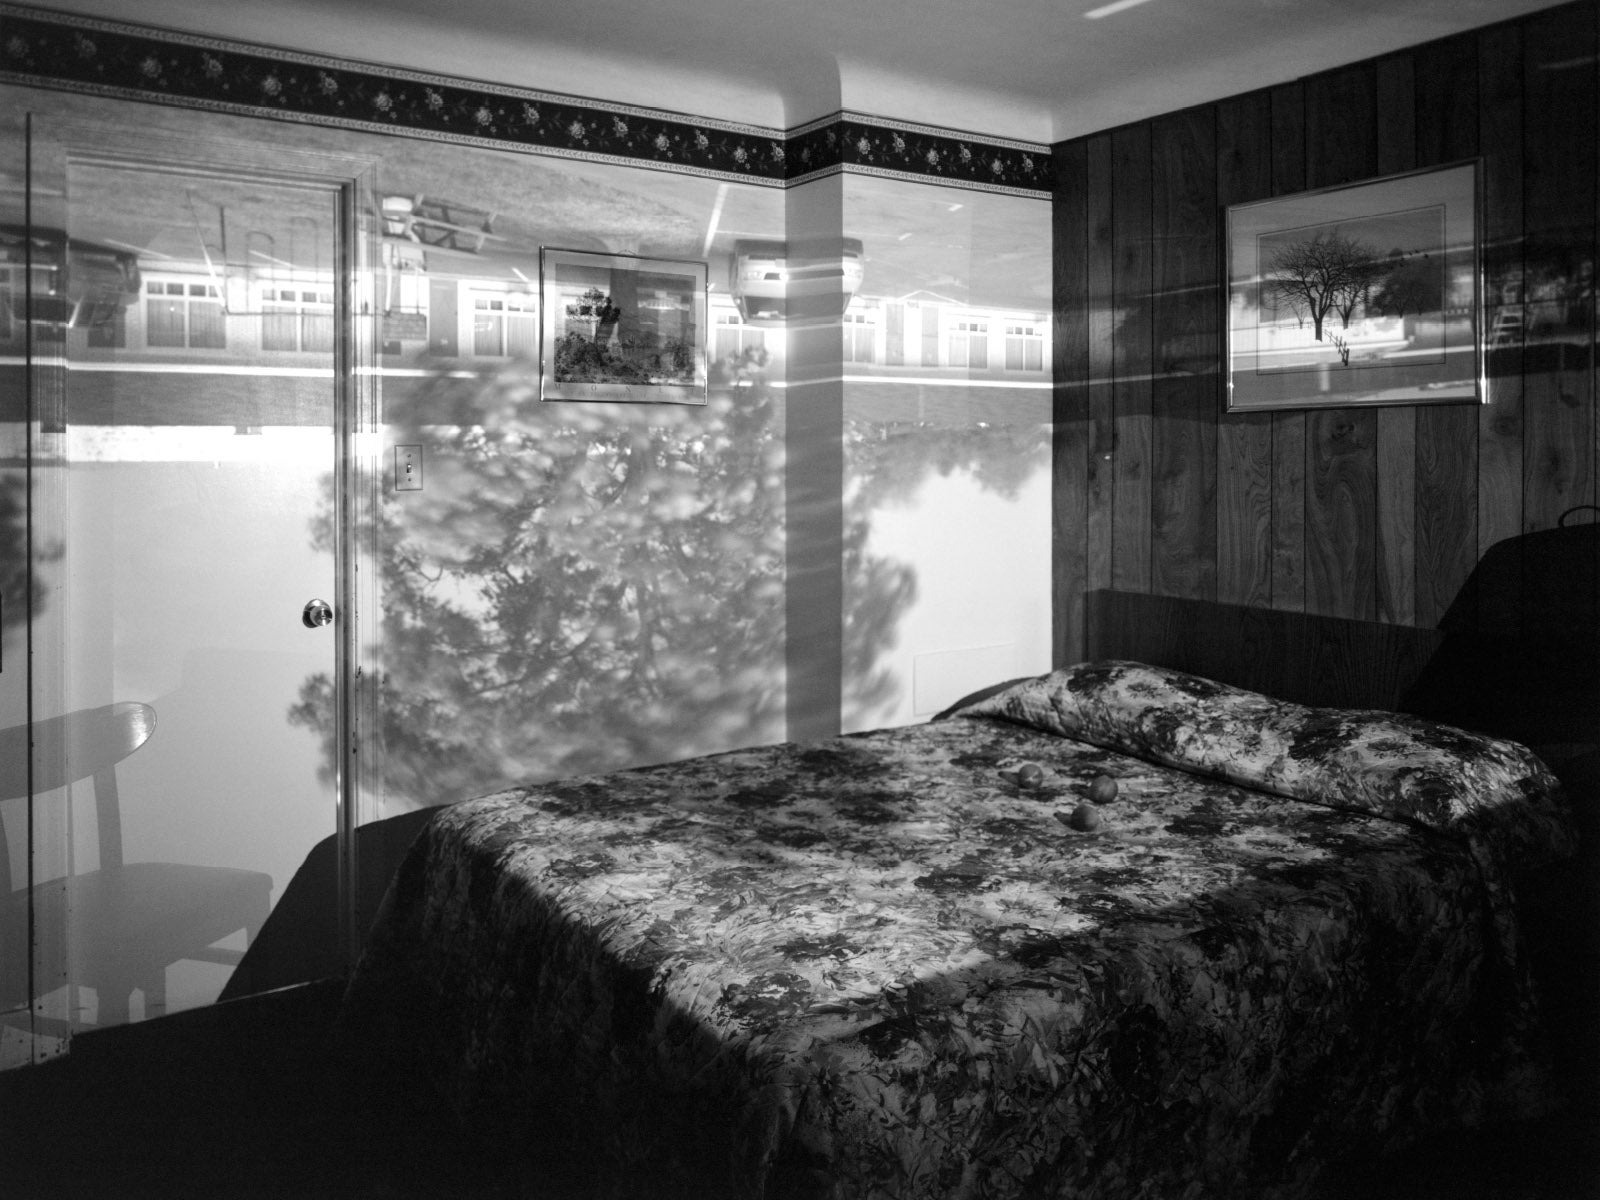 A black and white photograph of a bedroom with an upside down image projected onto the walls.